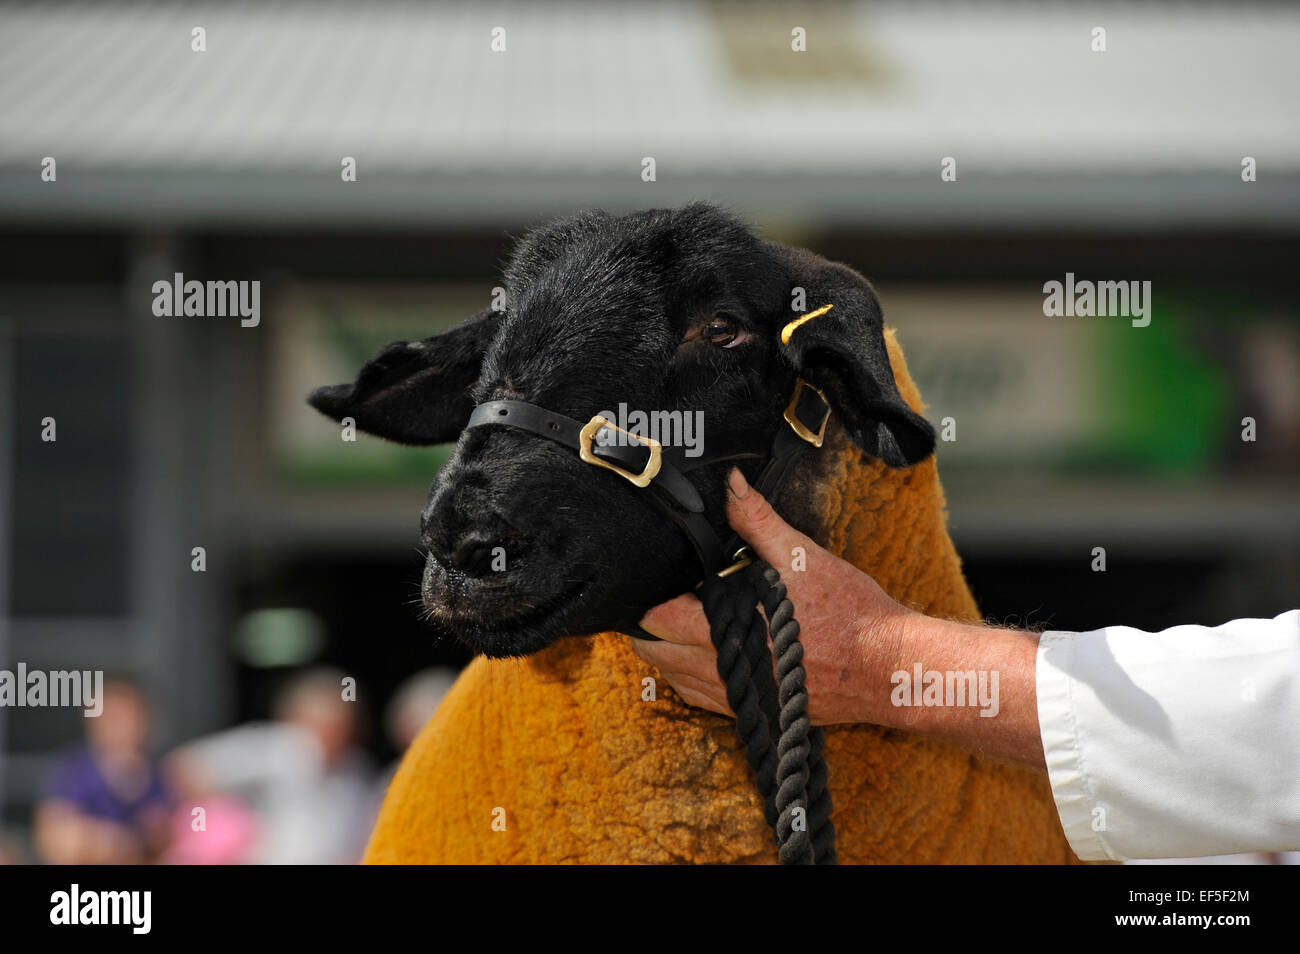 Suffolk sheep being showed at the Royal Welsh Show. Stock Photo